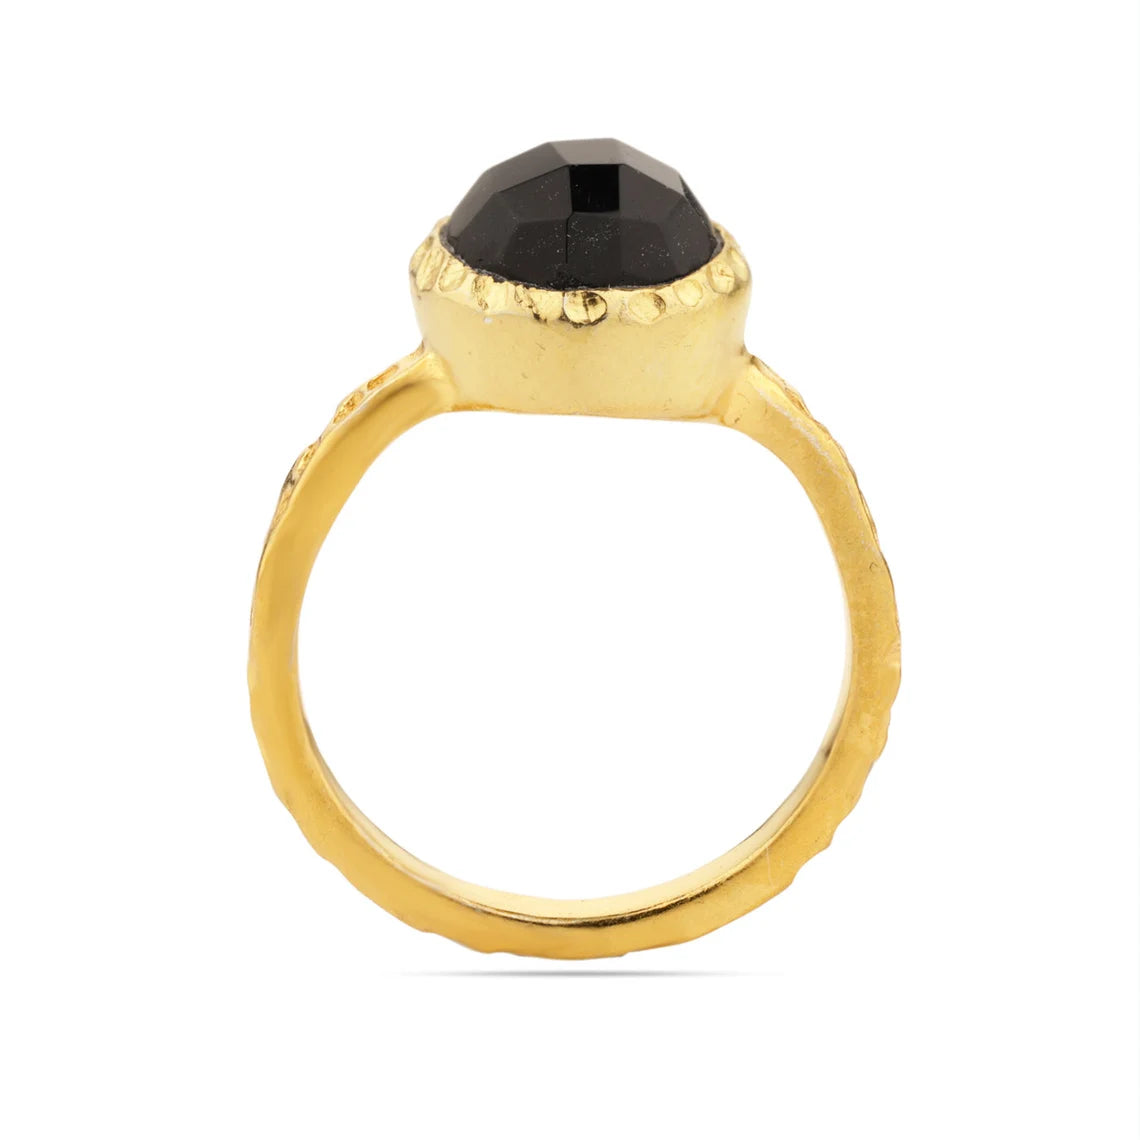 Gold Plated Antique dot Finish - 925 Solid Sterling Silver Ring - Black Onyx Gemstone Ring